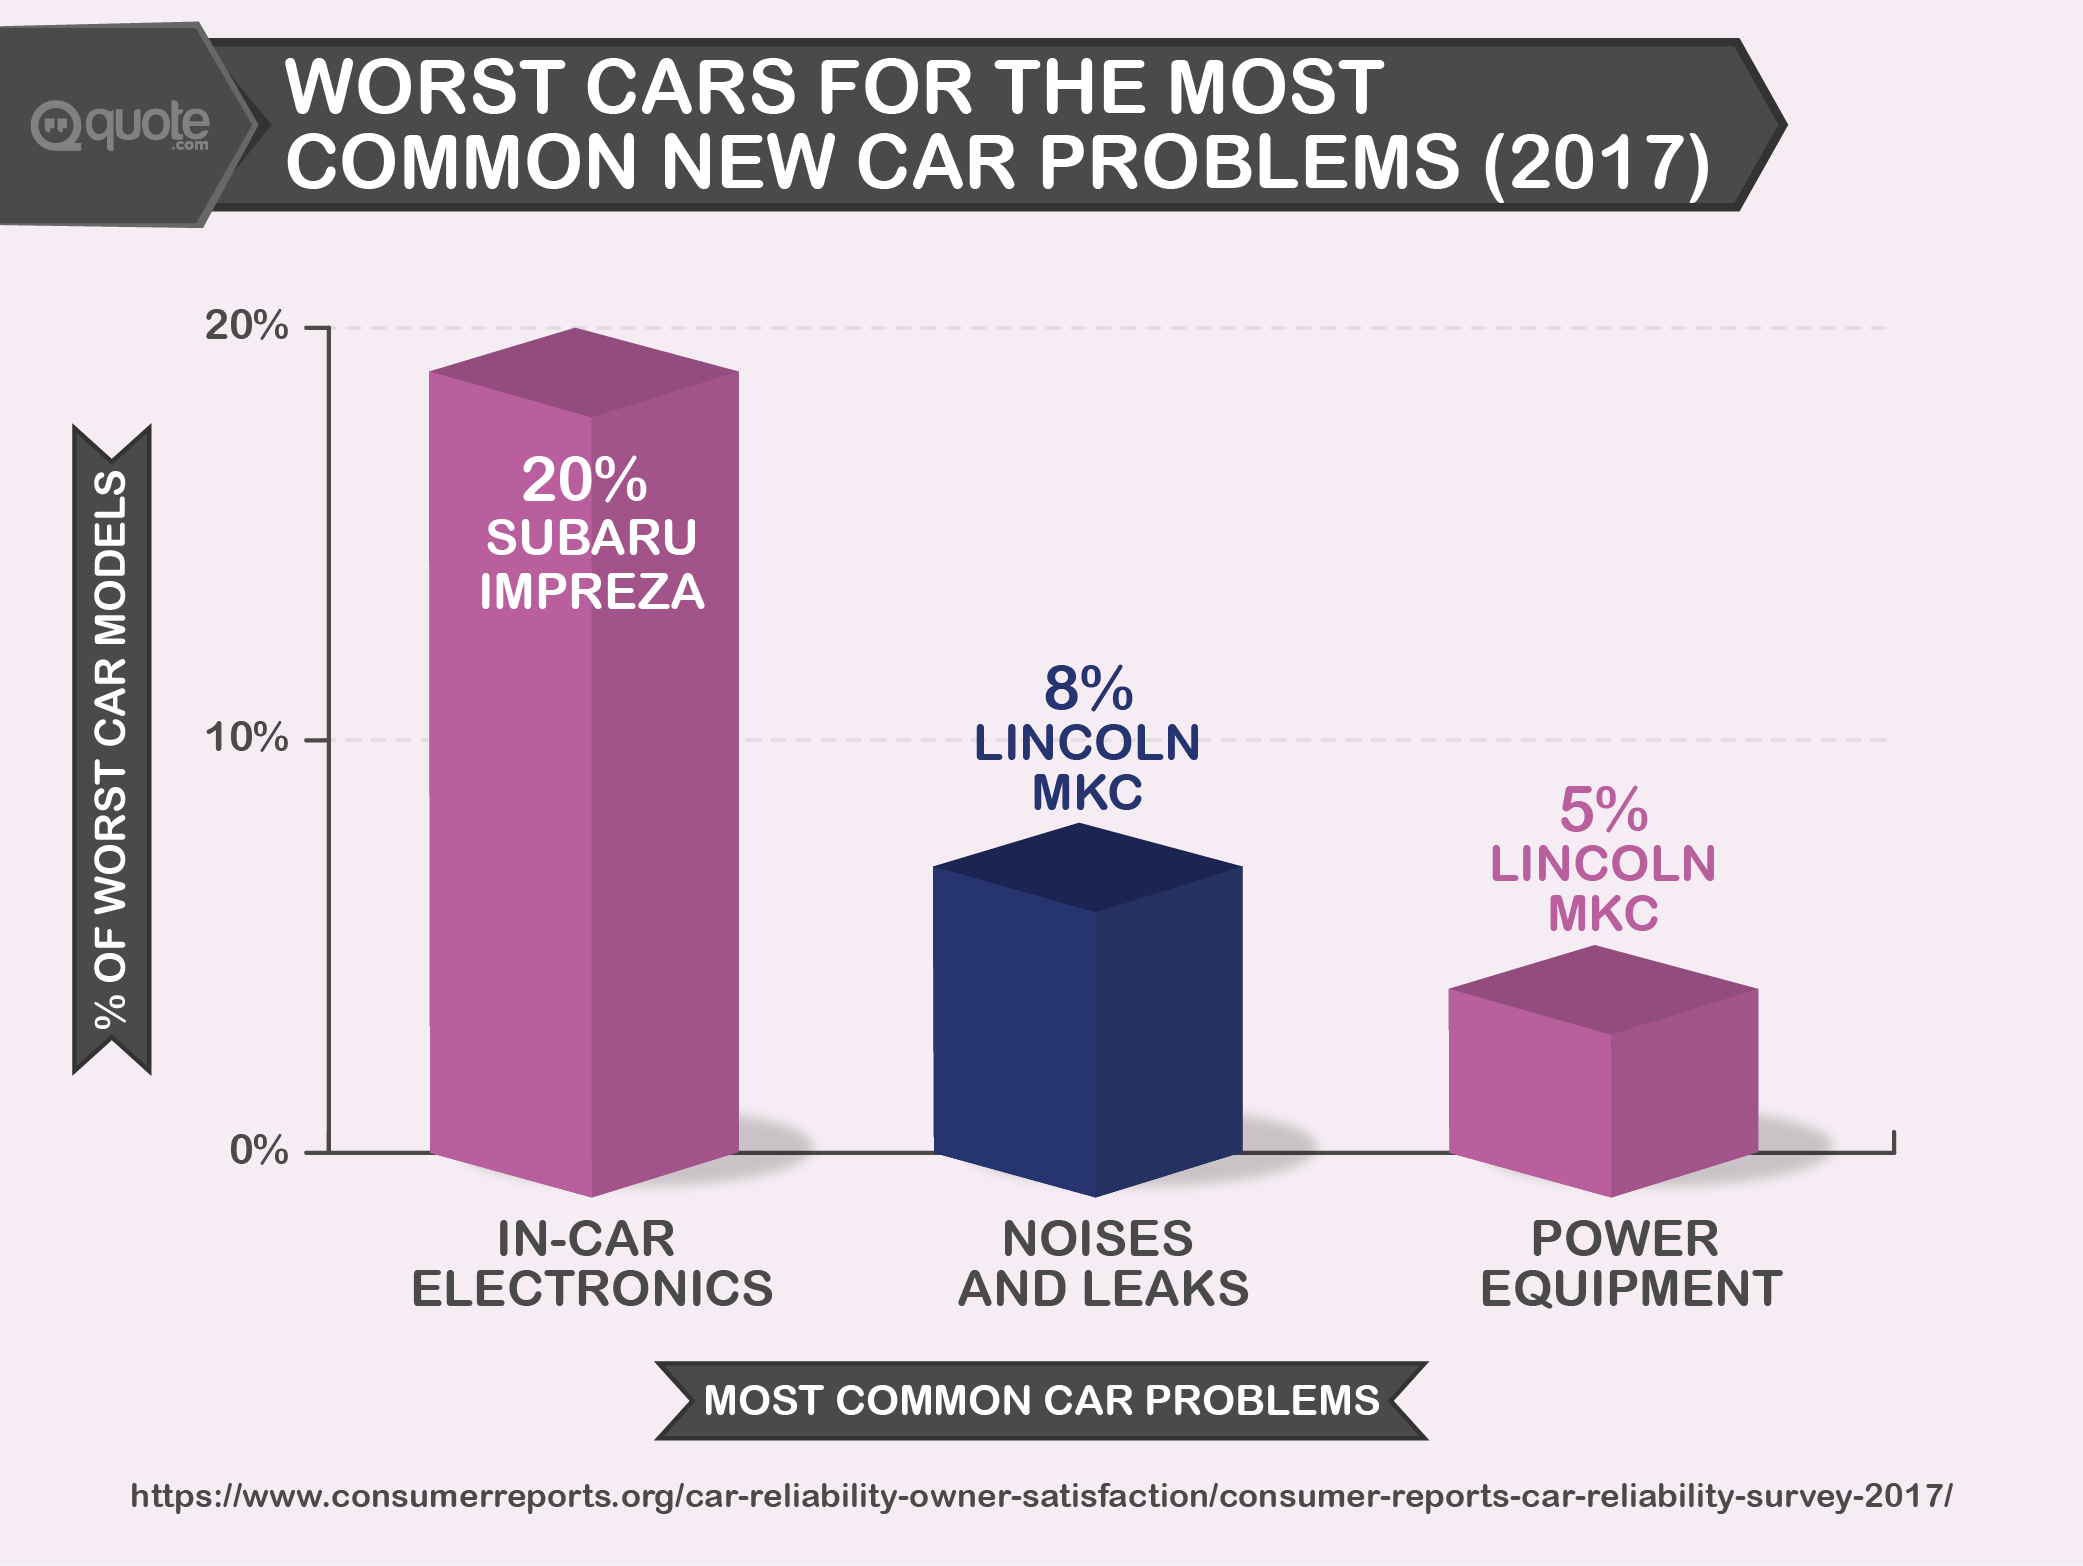 2017 Worst Cars for the Most Common New Car Problems